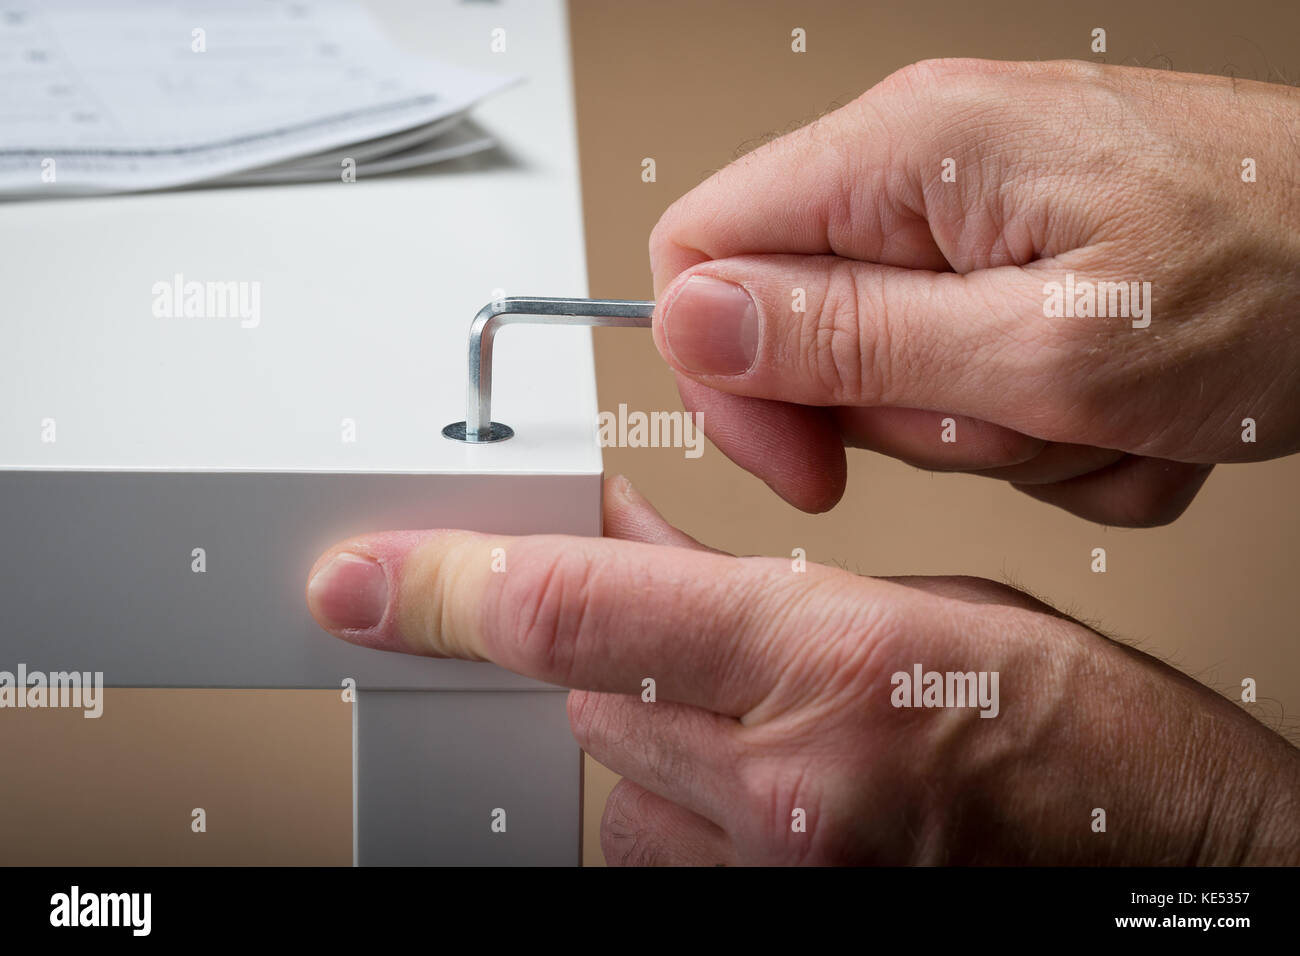 A man building flat pack furniture using an allen Key with the building instructions in the background Stock Photo